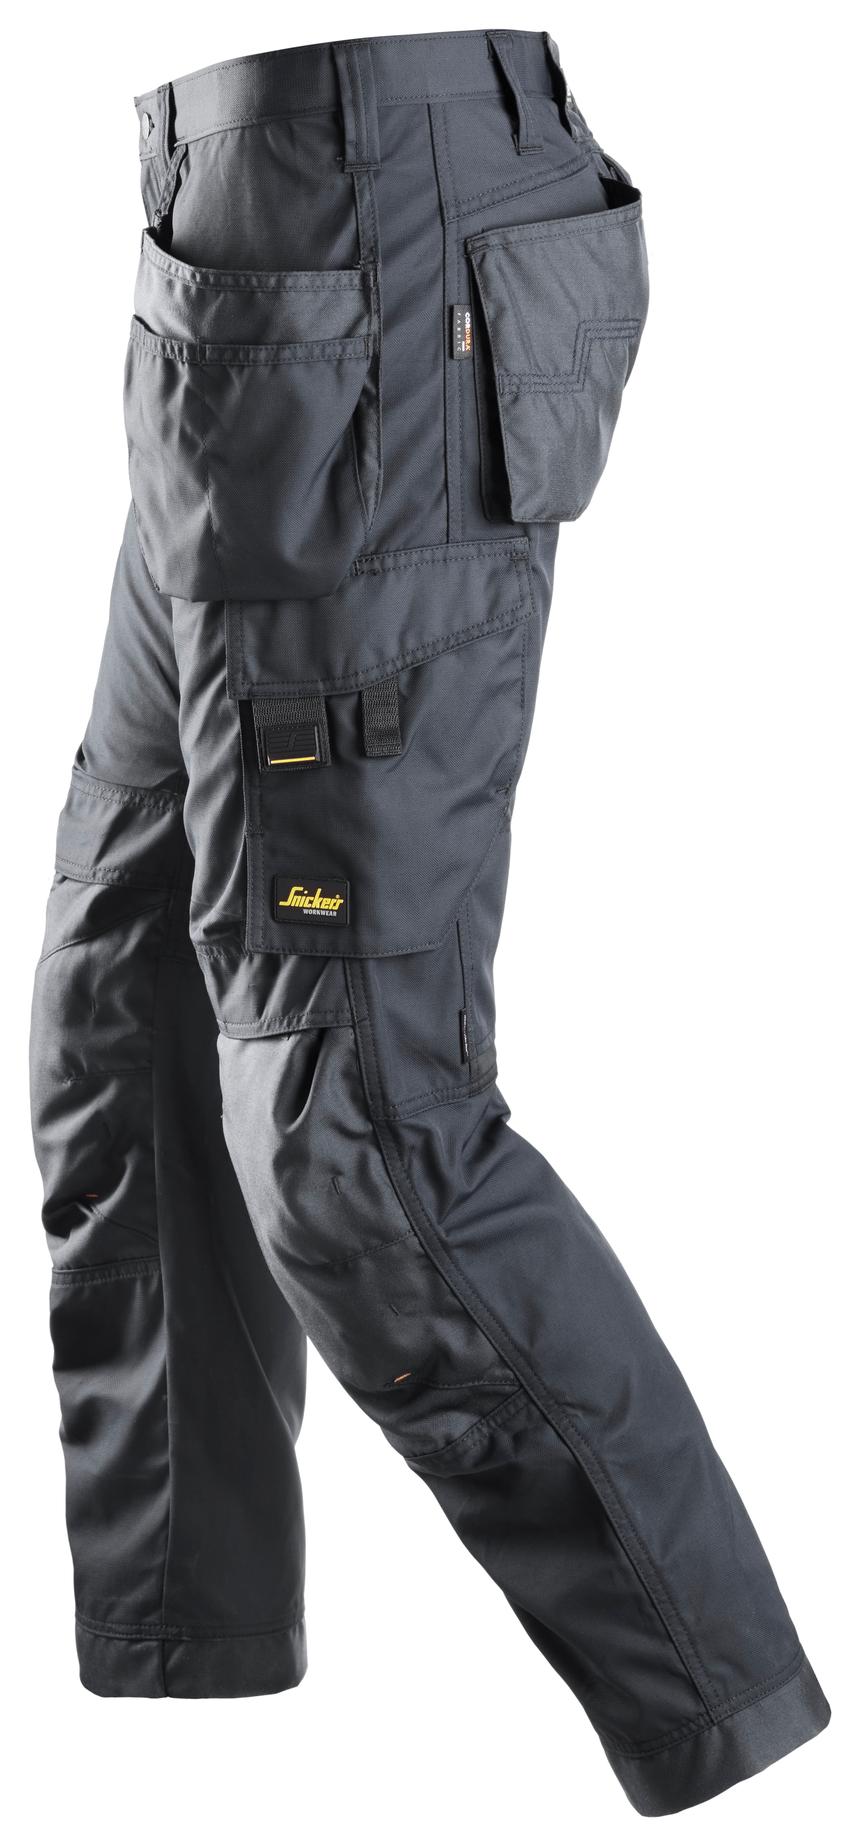 Buy Snickers AllroundWork service trousers 6803 at Cheap-workwear.com